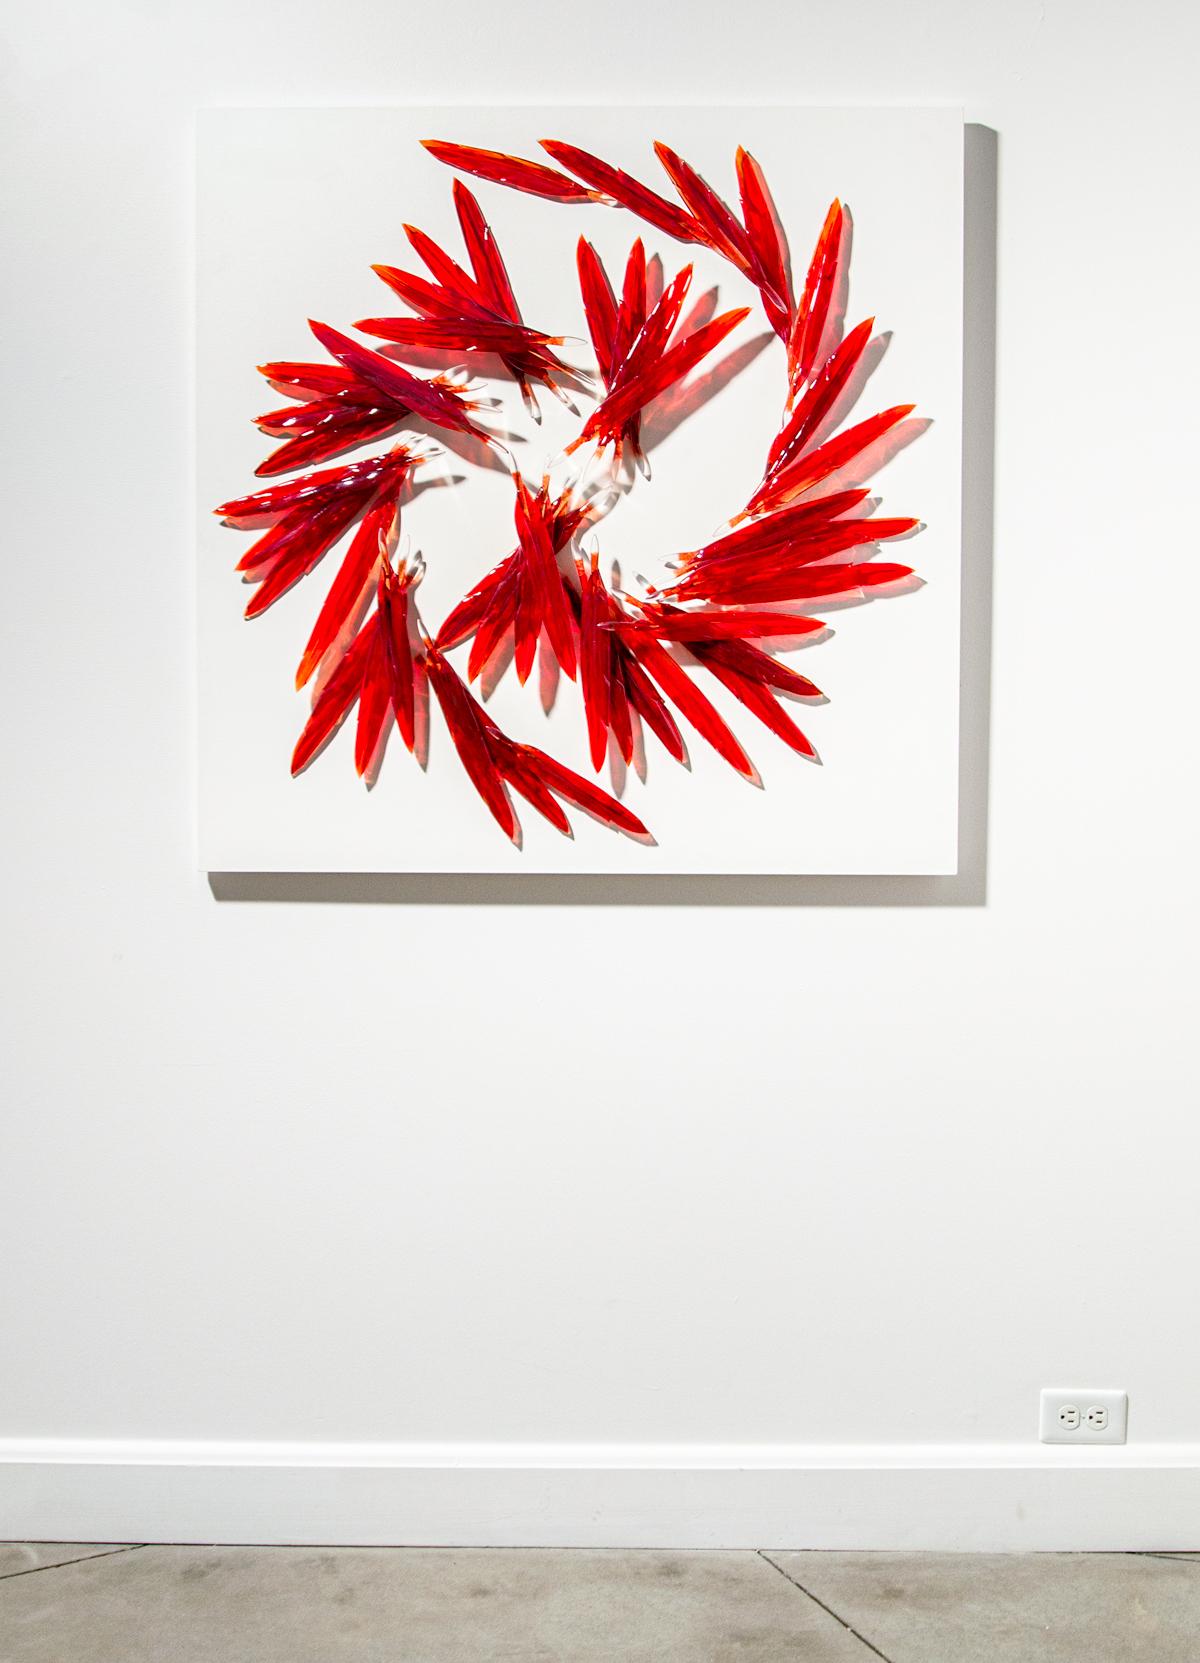 Fire Fly - large, red, translucent, feathers, solid glass wall sculpture - Sculpture by John Paul Robinson